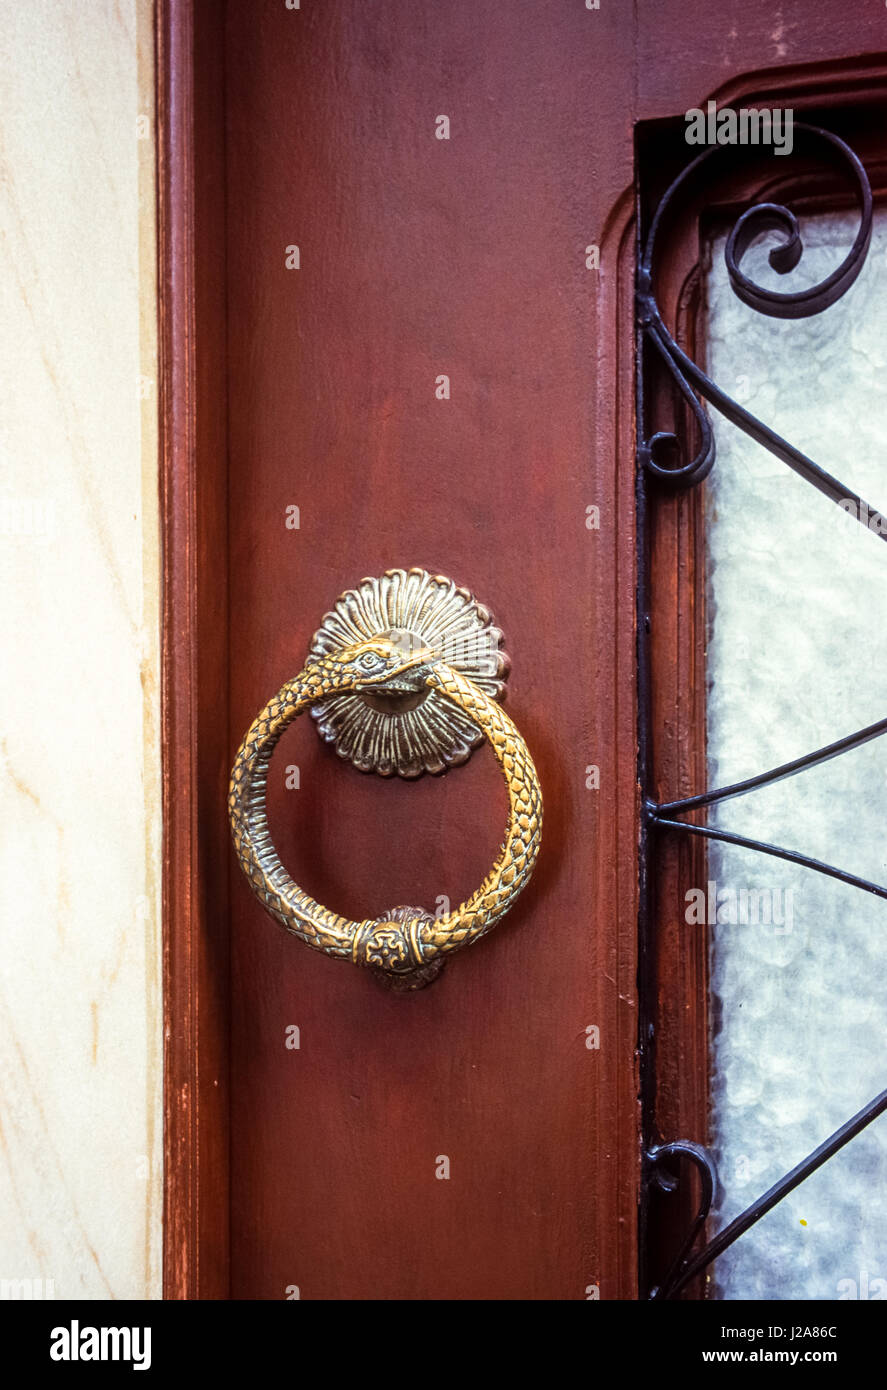 Snake shaped door knocker in the Alfama of Lisbon, Portugal. The ouroboros is an ancient symbol depicting a serpent or dragon eating its own tail Stock Photo